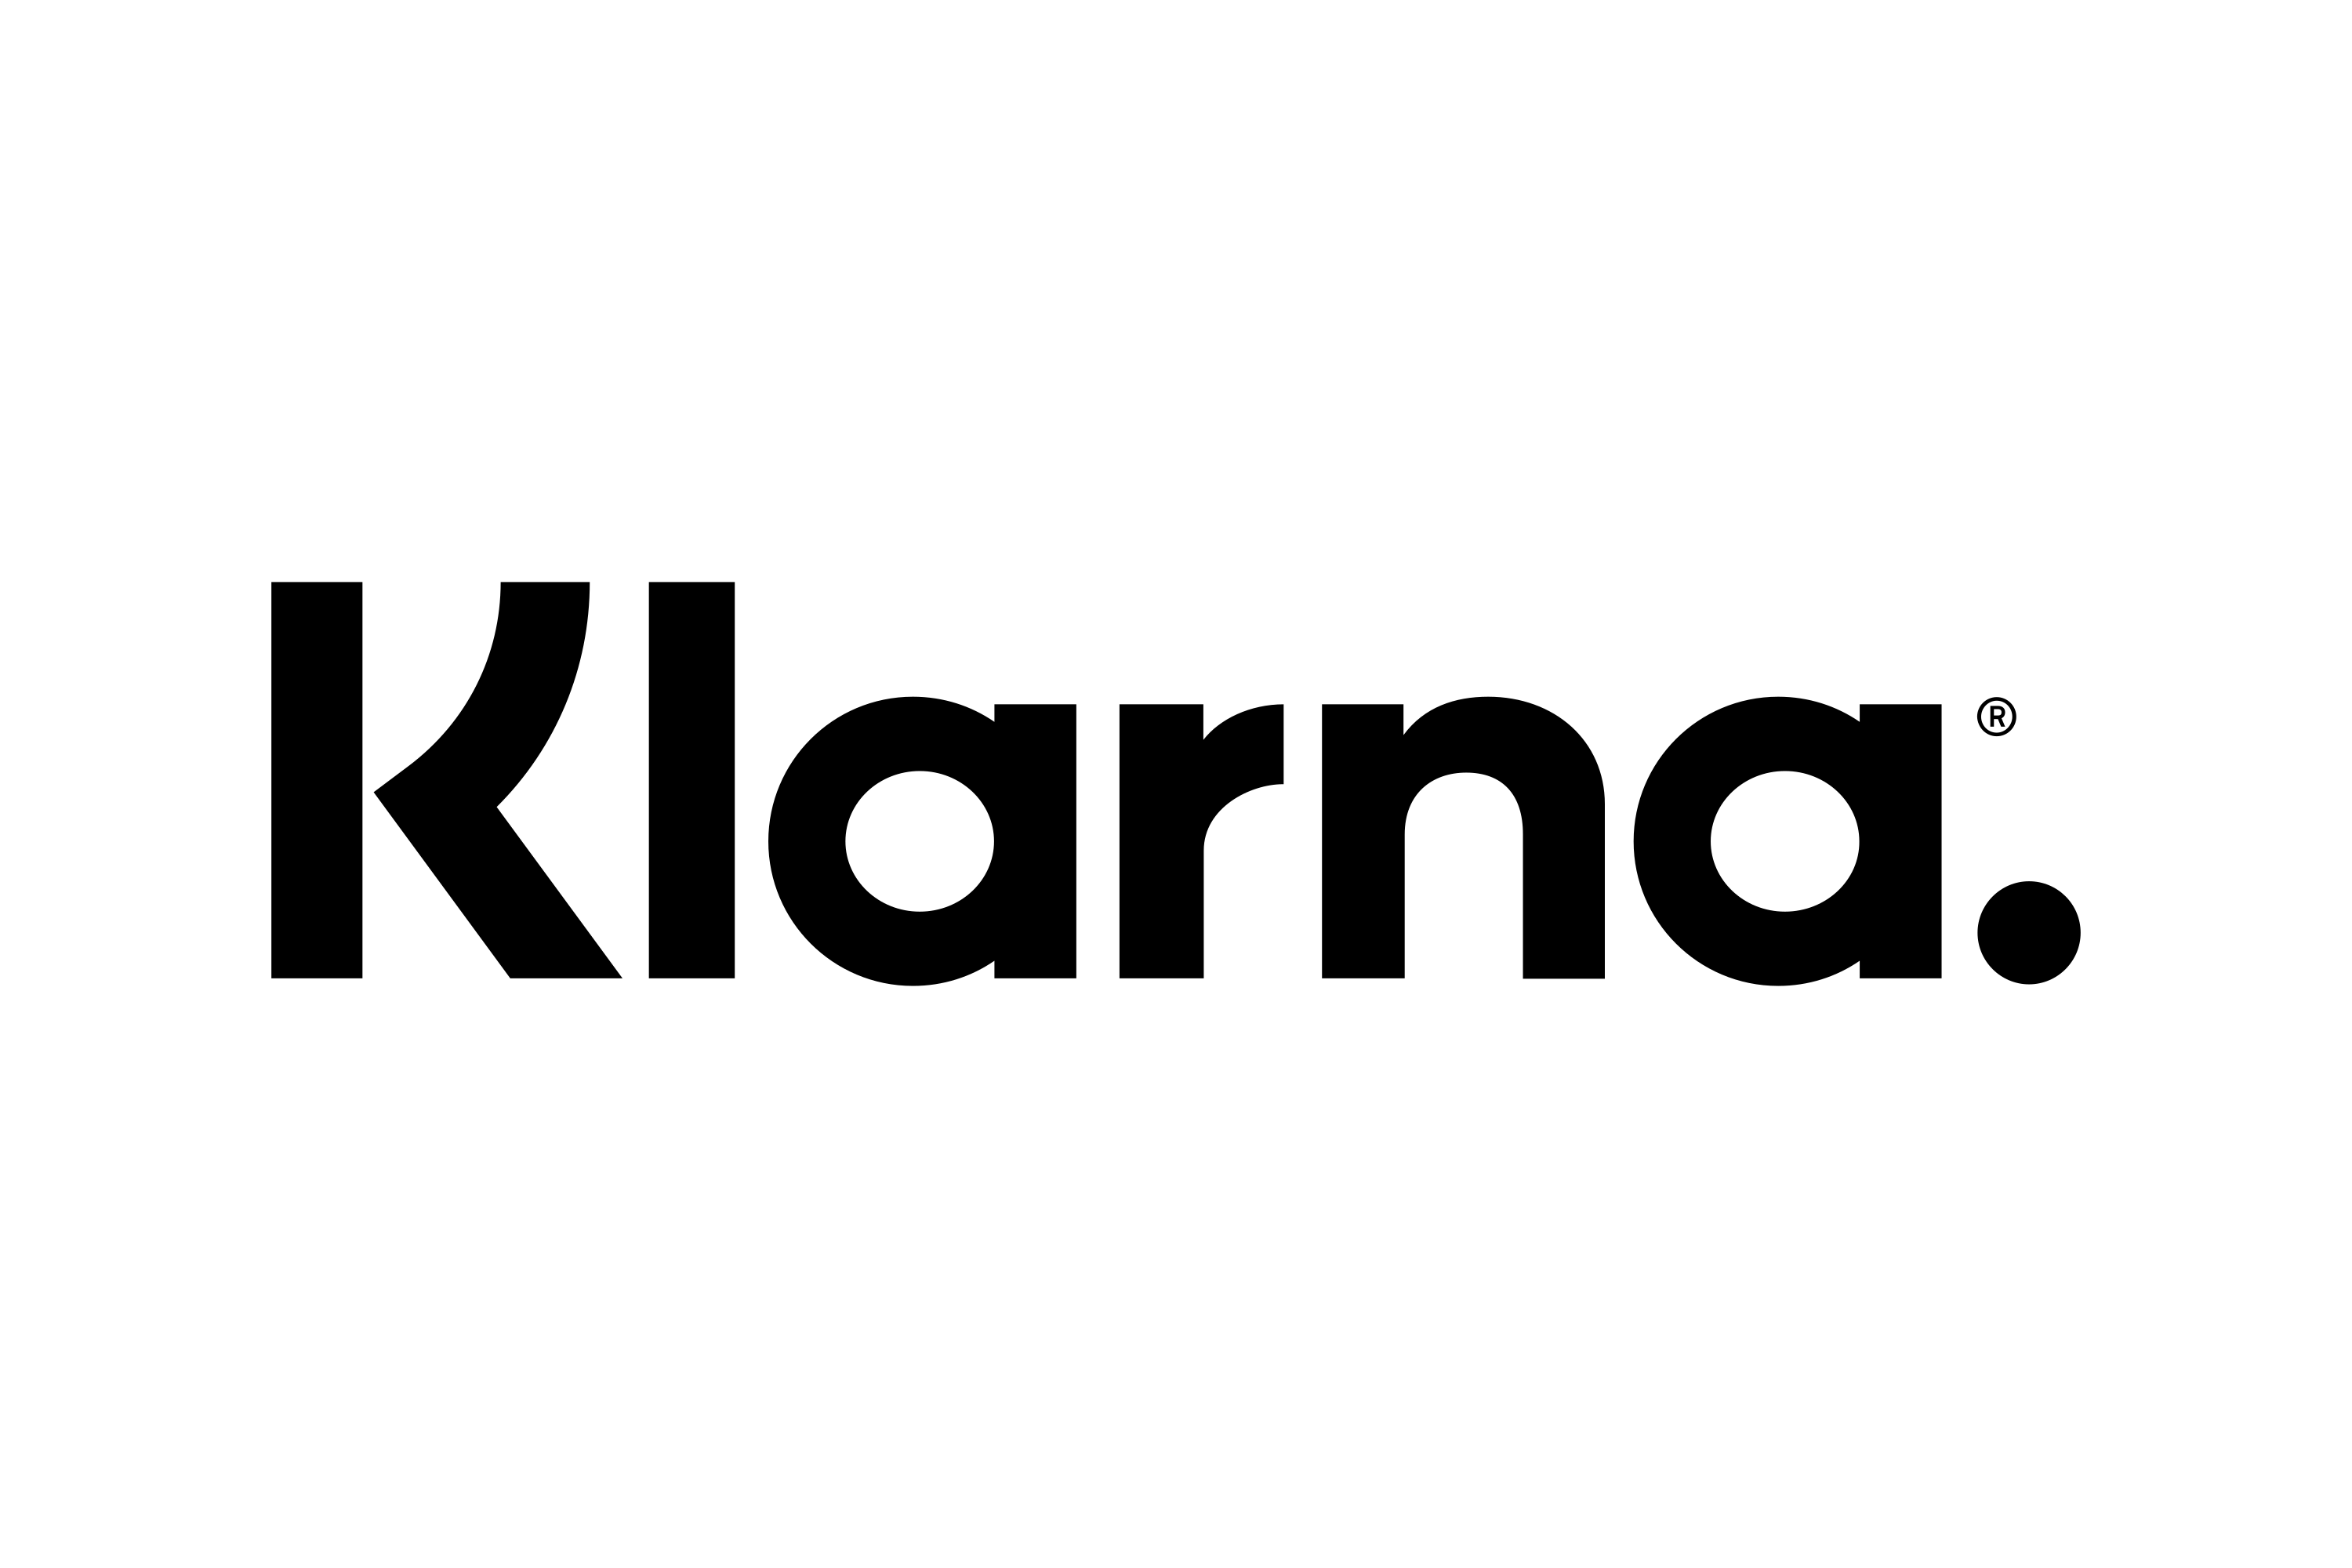 Klarna Launches ‘Klarna Kosma’ Sub-brand and Business Unit to Harness Rapid Growth of Open Banking Platform